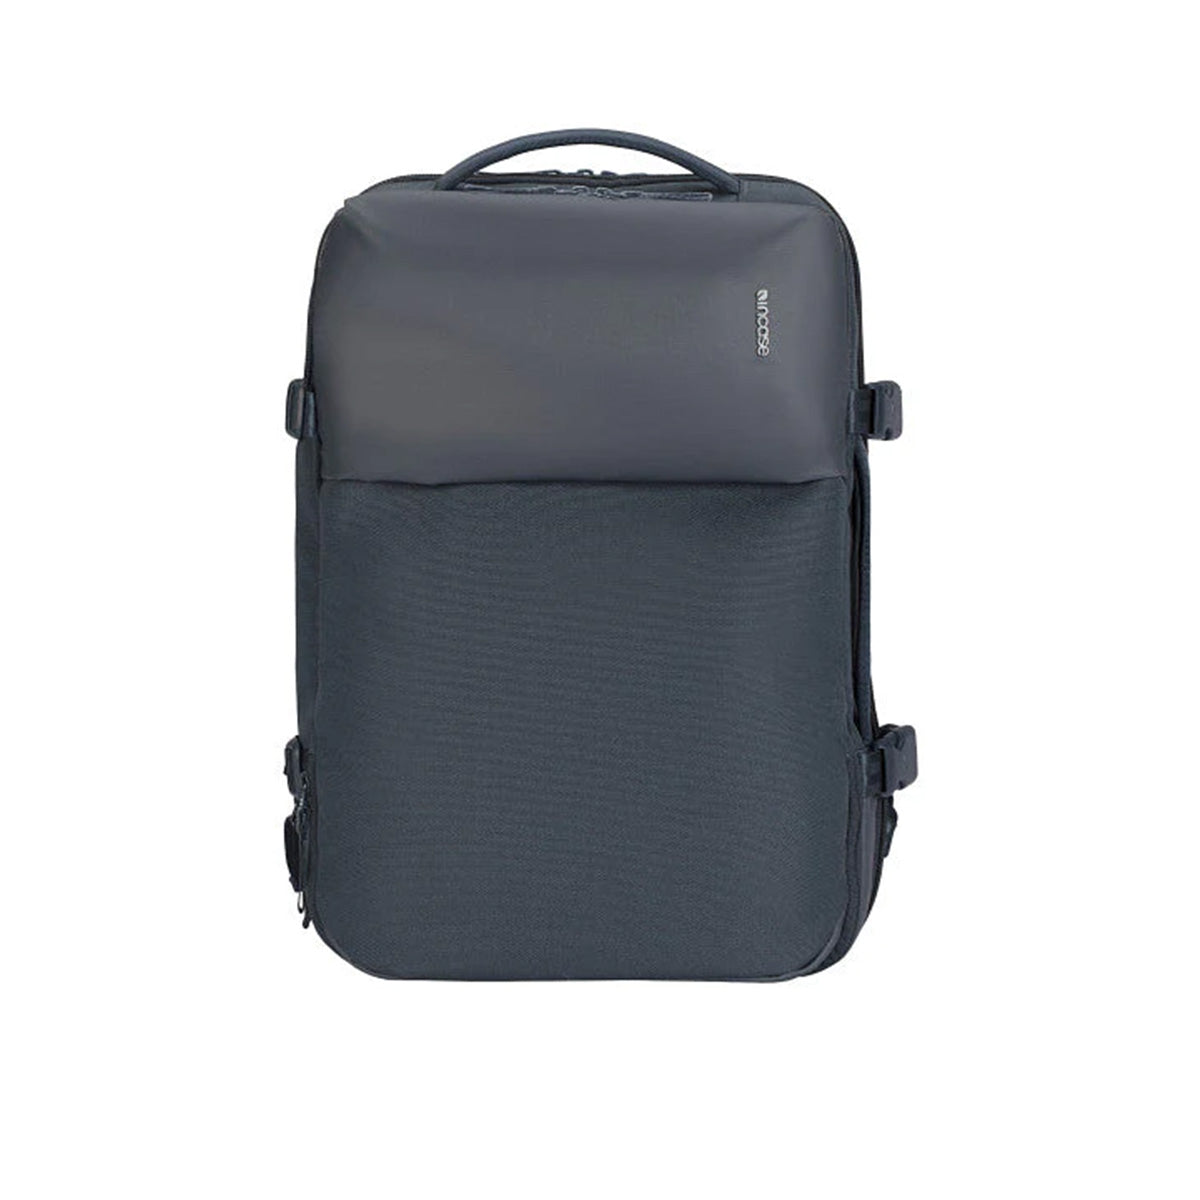 Incase A.R.C. Travel Pack (Navy)